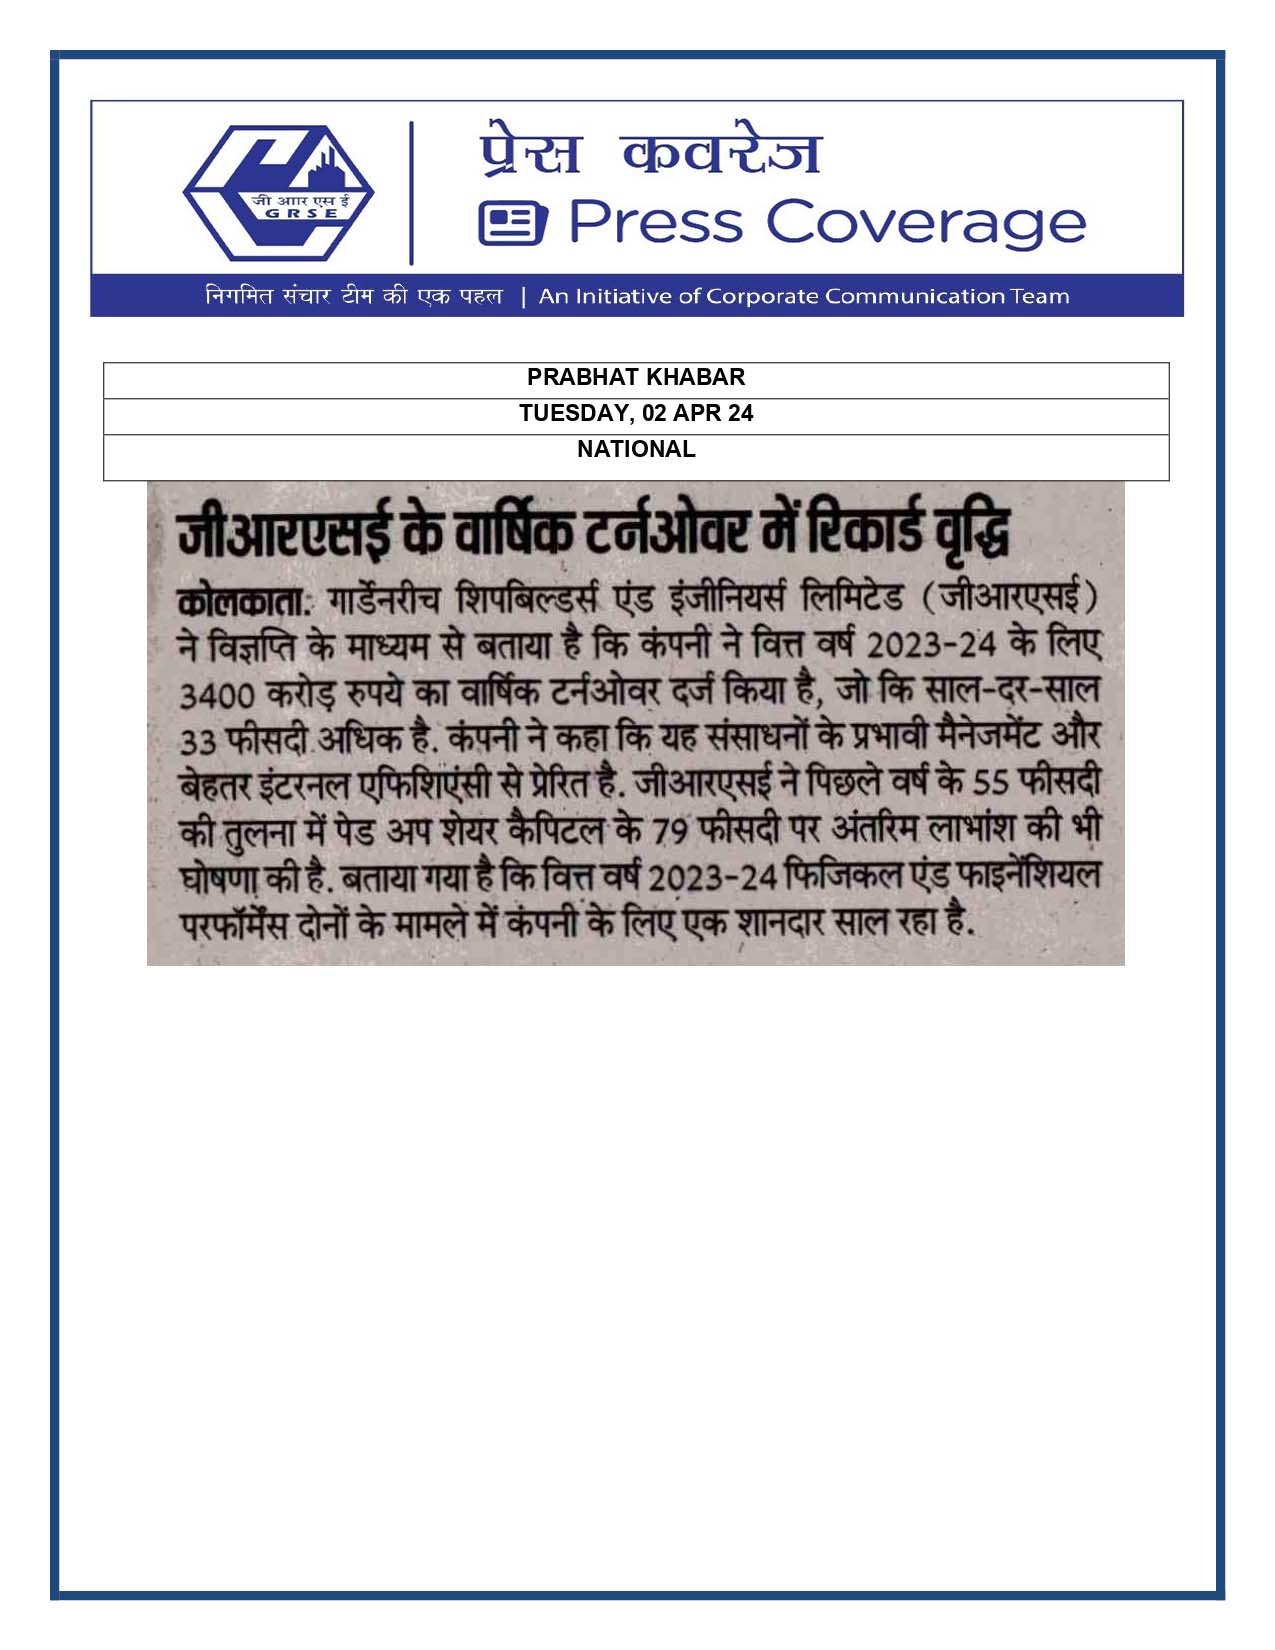 Press Coverage : Prabhat Khabar, 02 Apr 24 : Record growth in annual turnover of GRSE